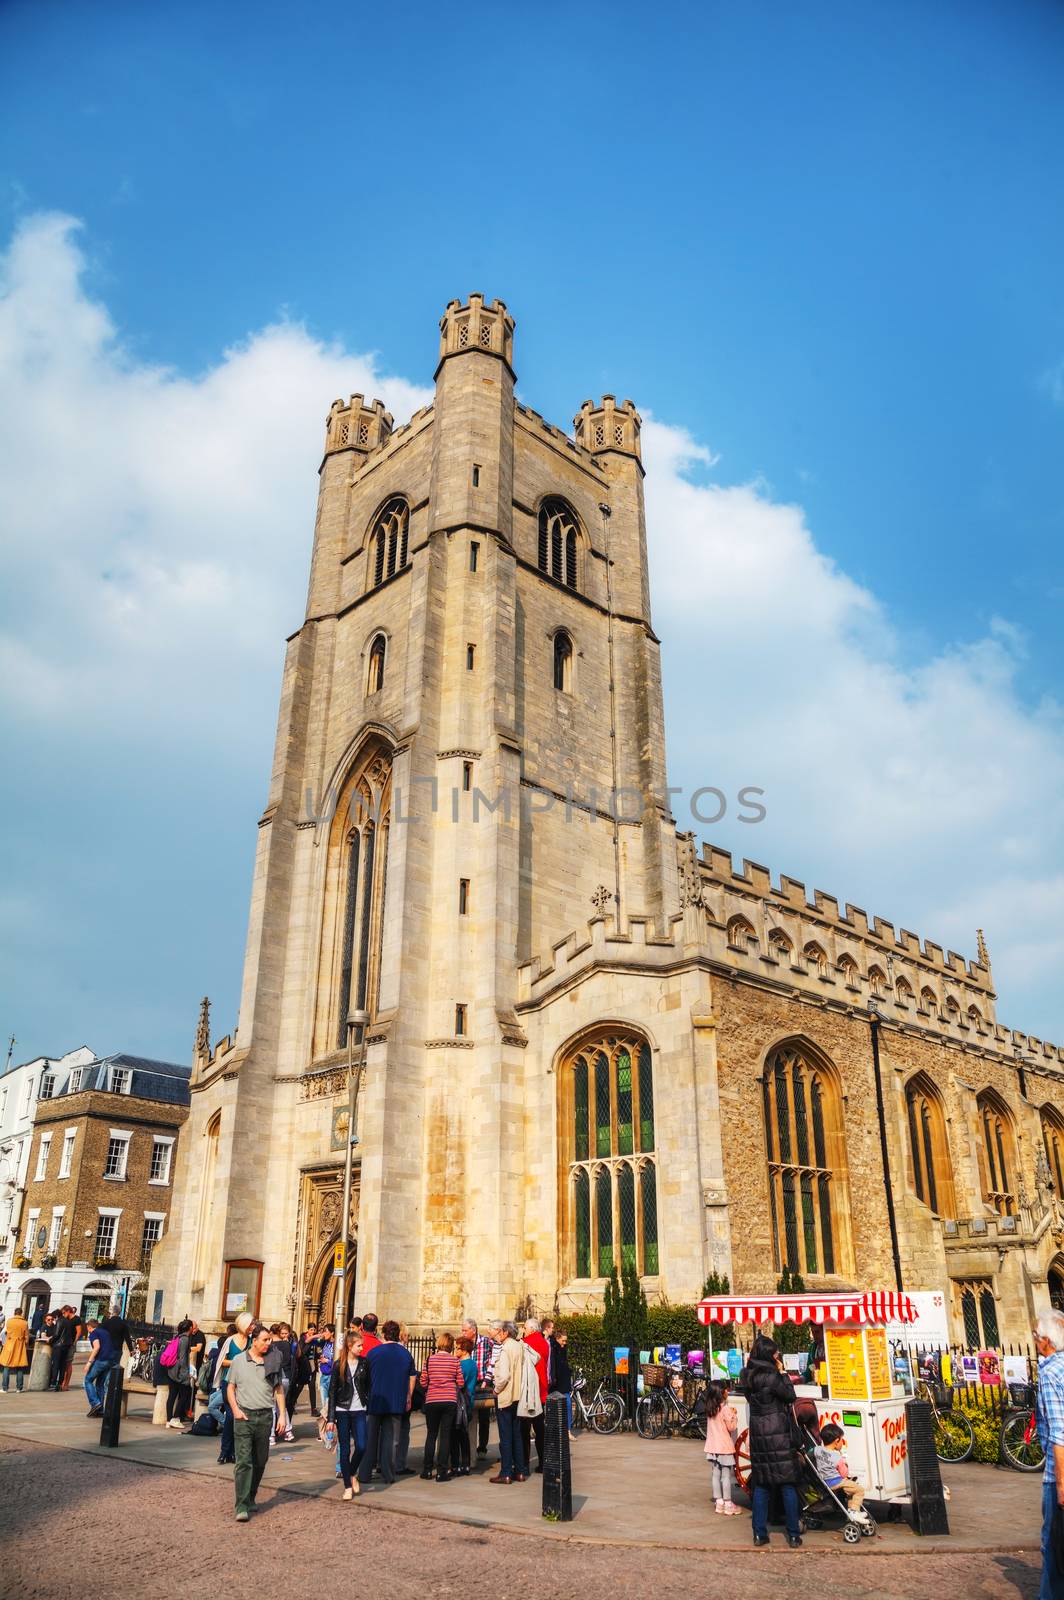 Cambridge, UK - April 9: Old Great St Mary's Church on April 9, 2015 in Cambridge, UK. It's a university city and the county town of Cambridgeshire, England.